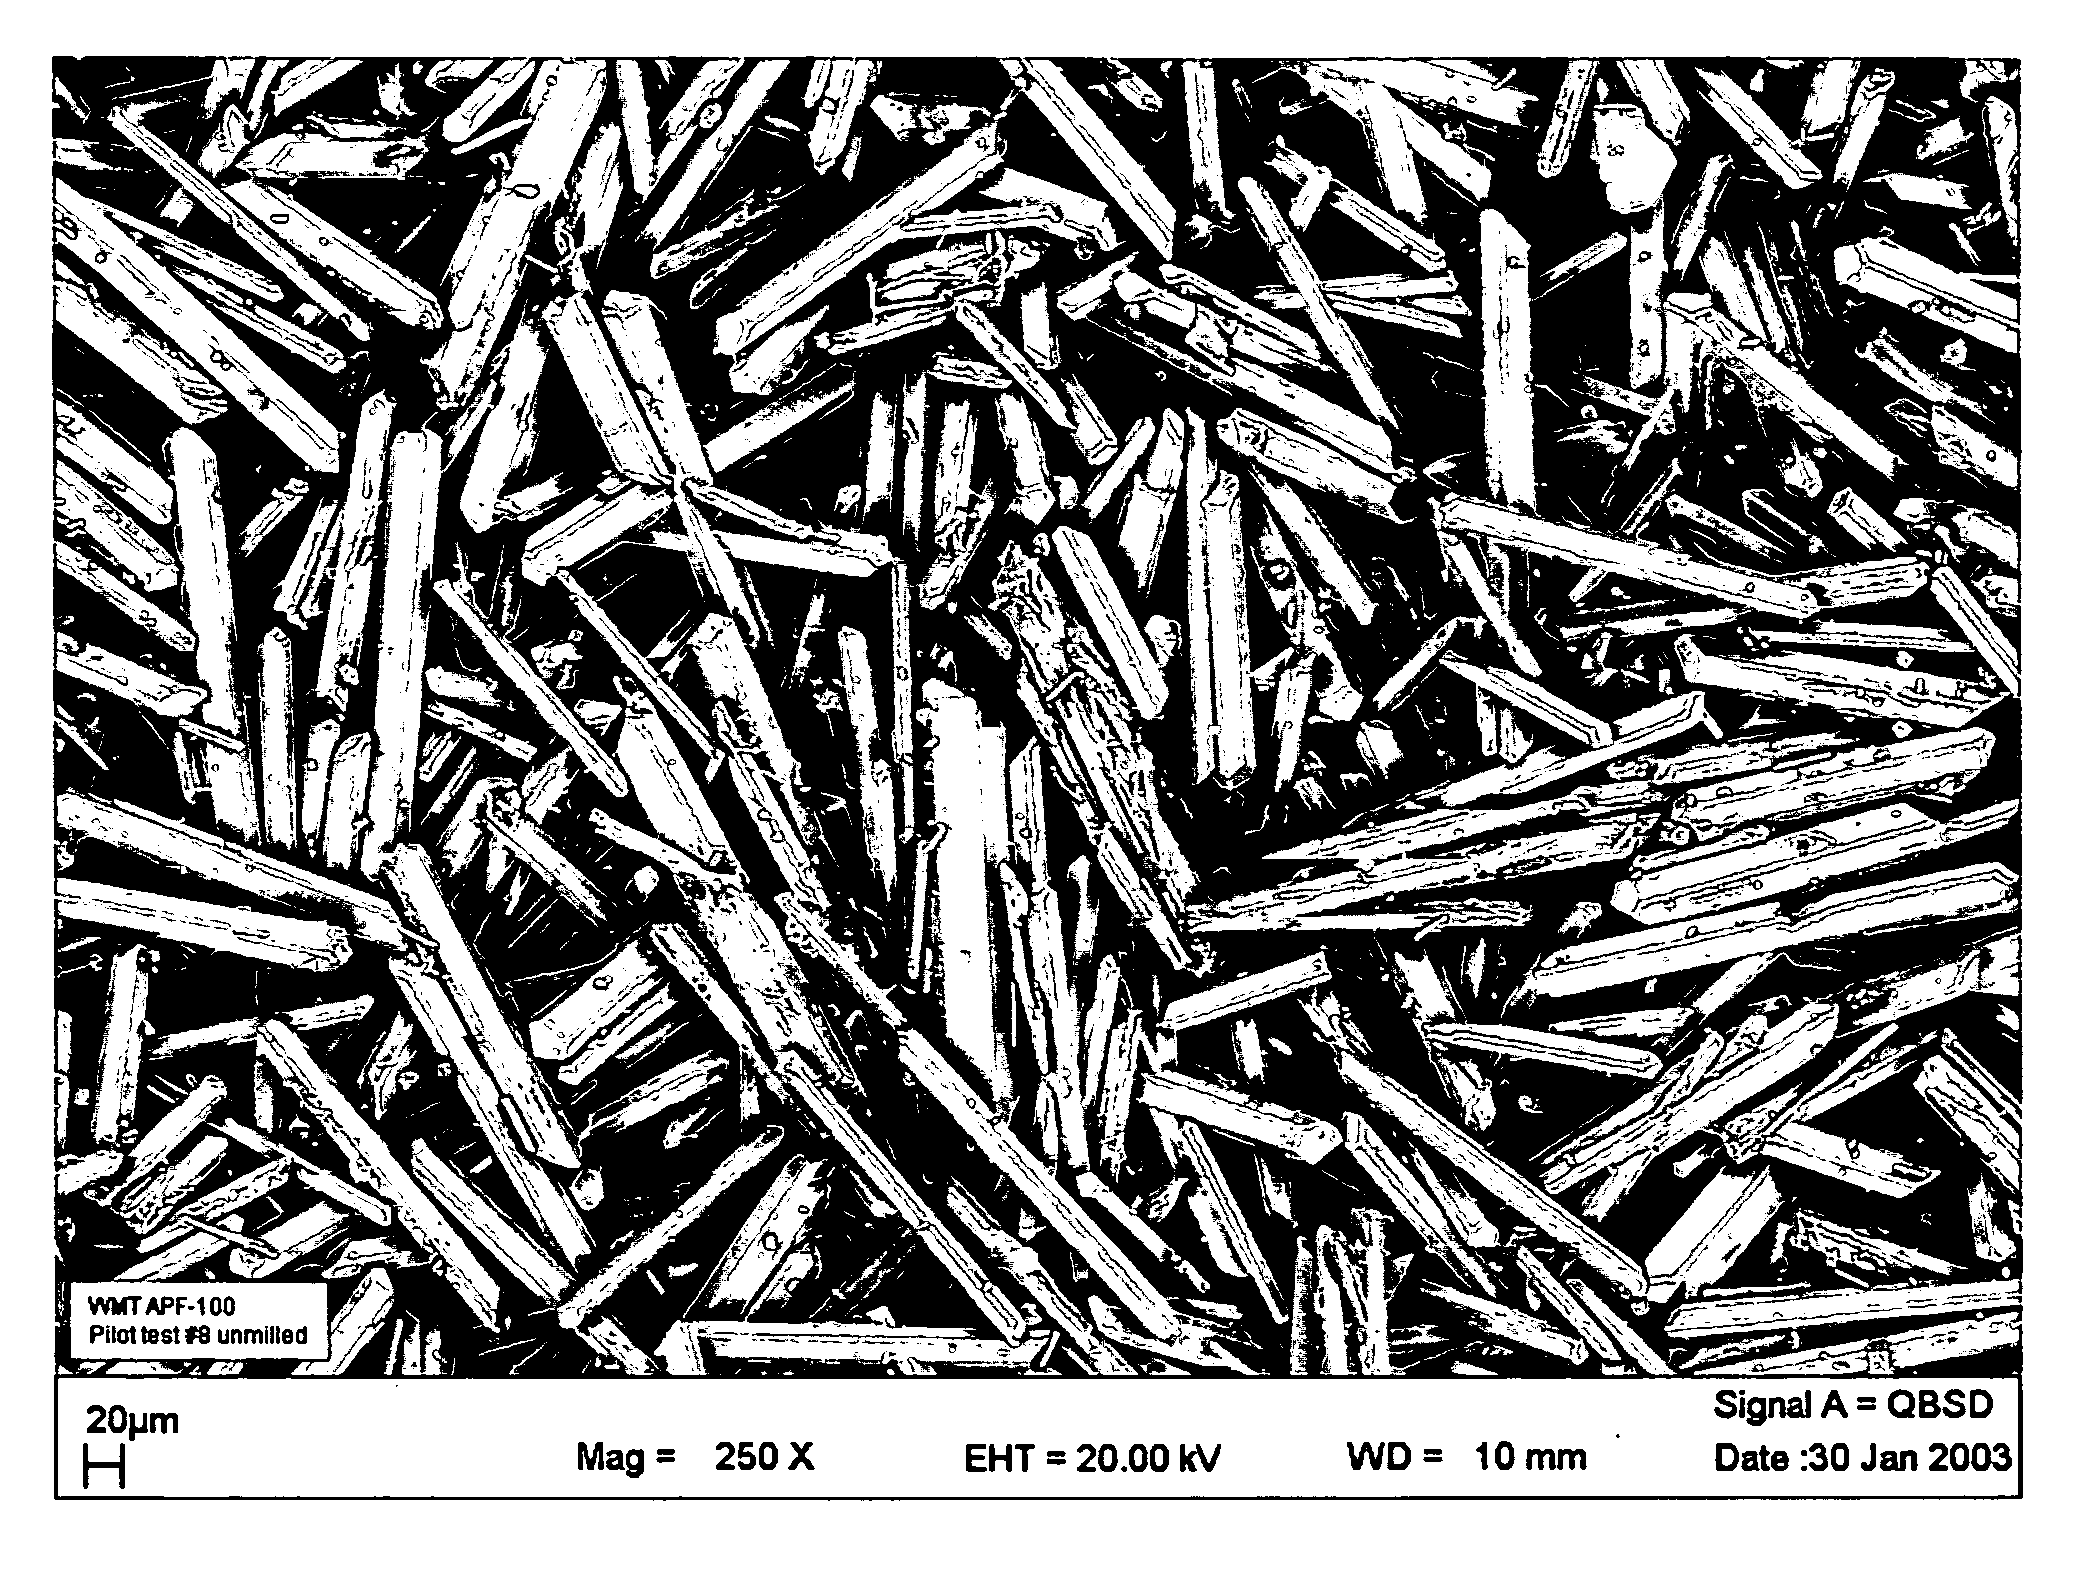 Injectable resorbable bone graft material, powder for forming same and methods relating thereto for treating bone defects